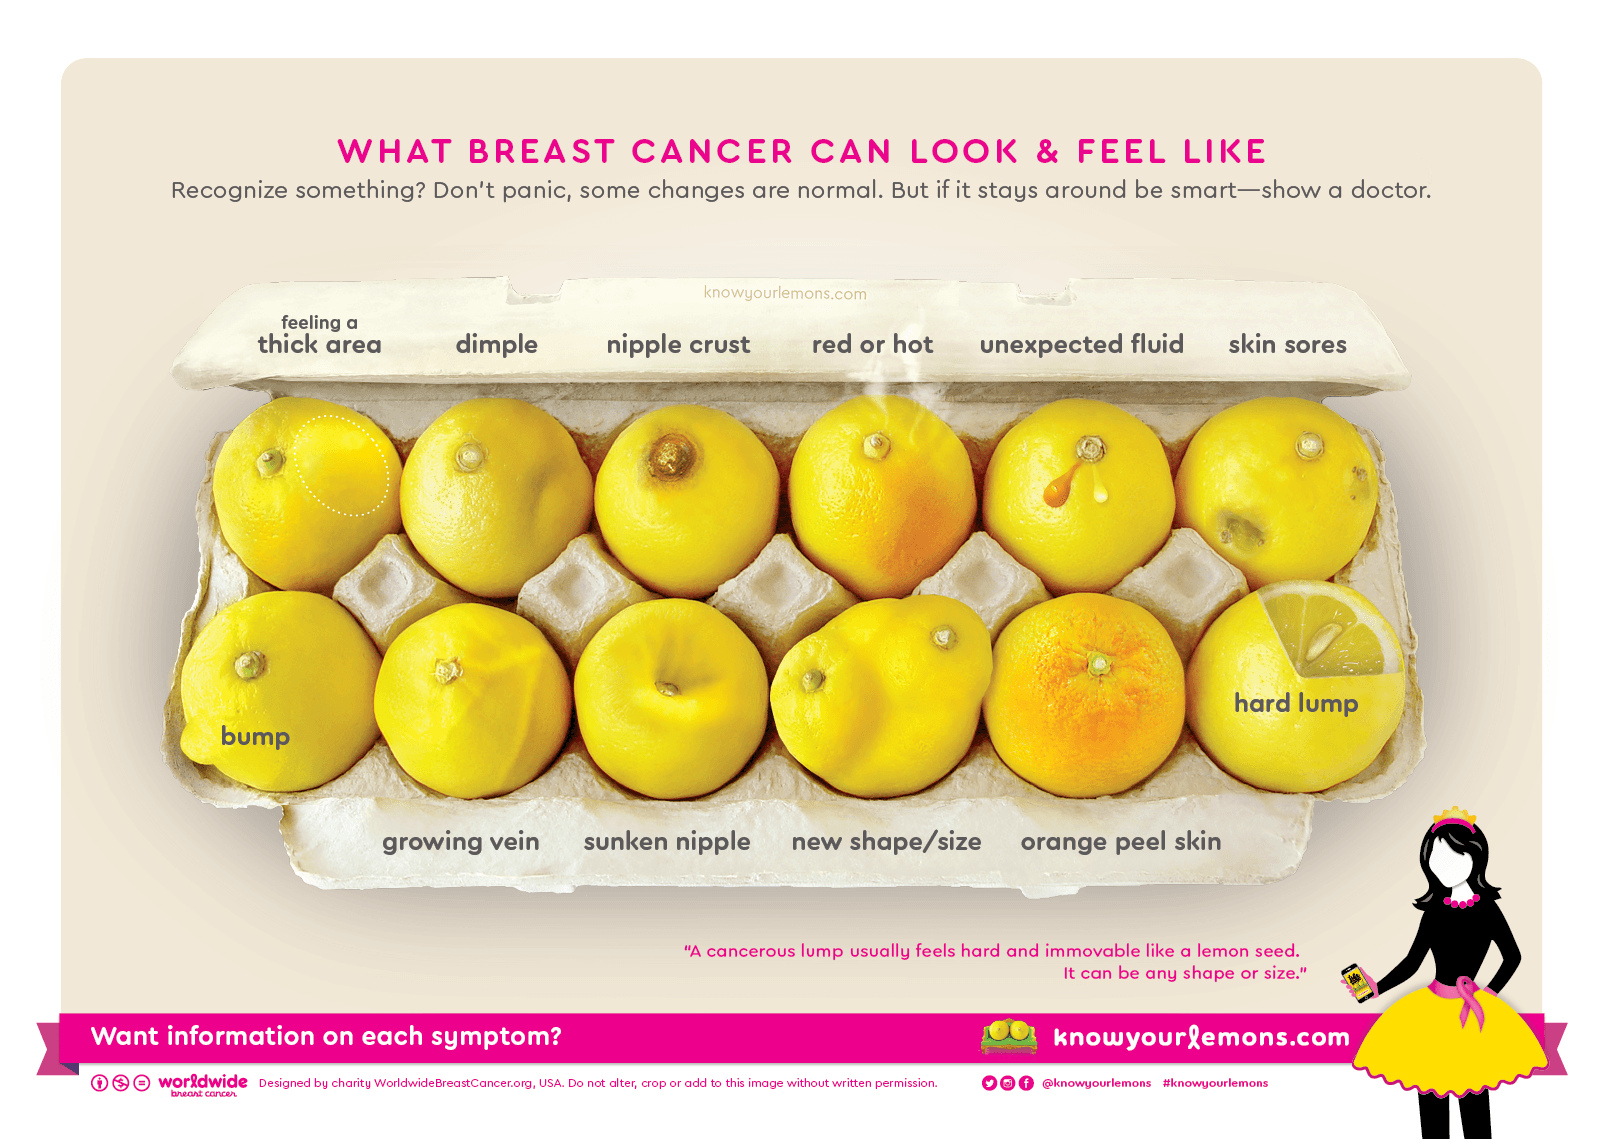 A sample photo of a breast cancer using lemons